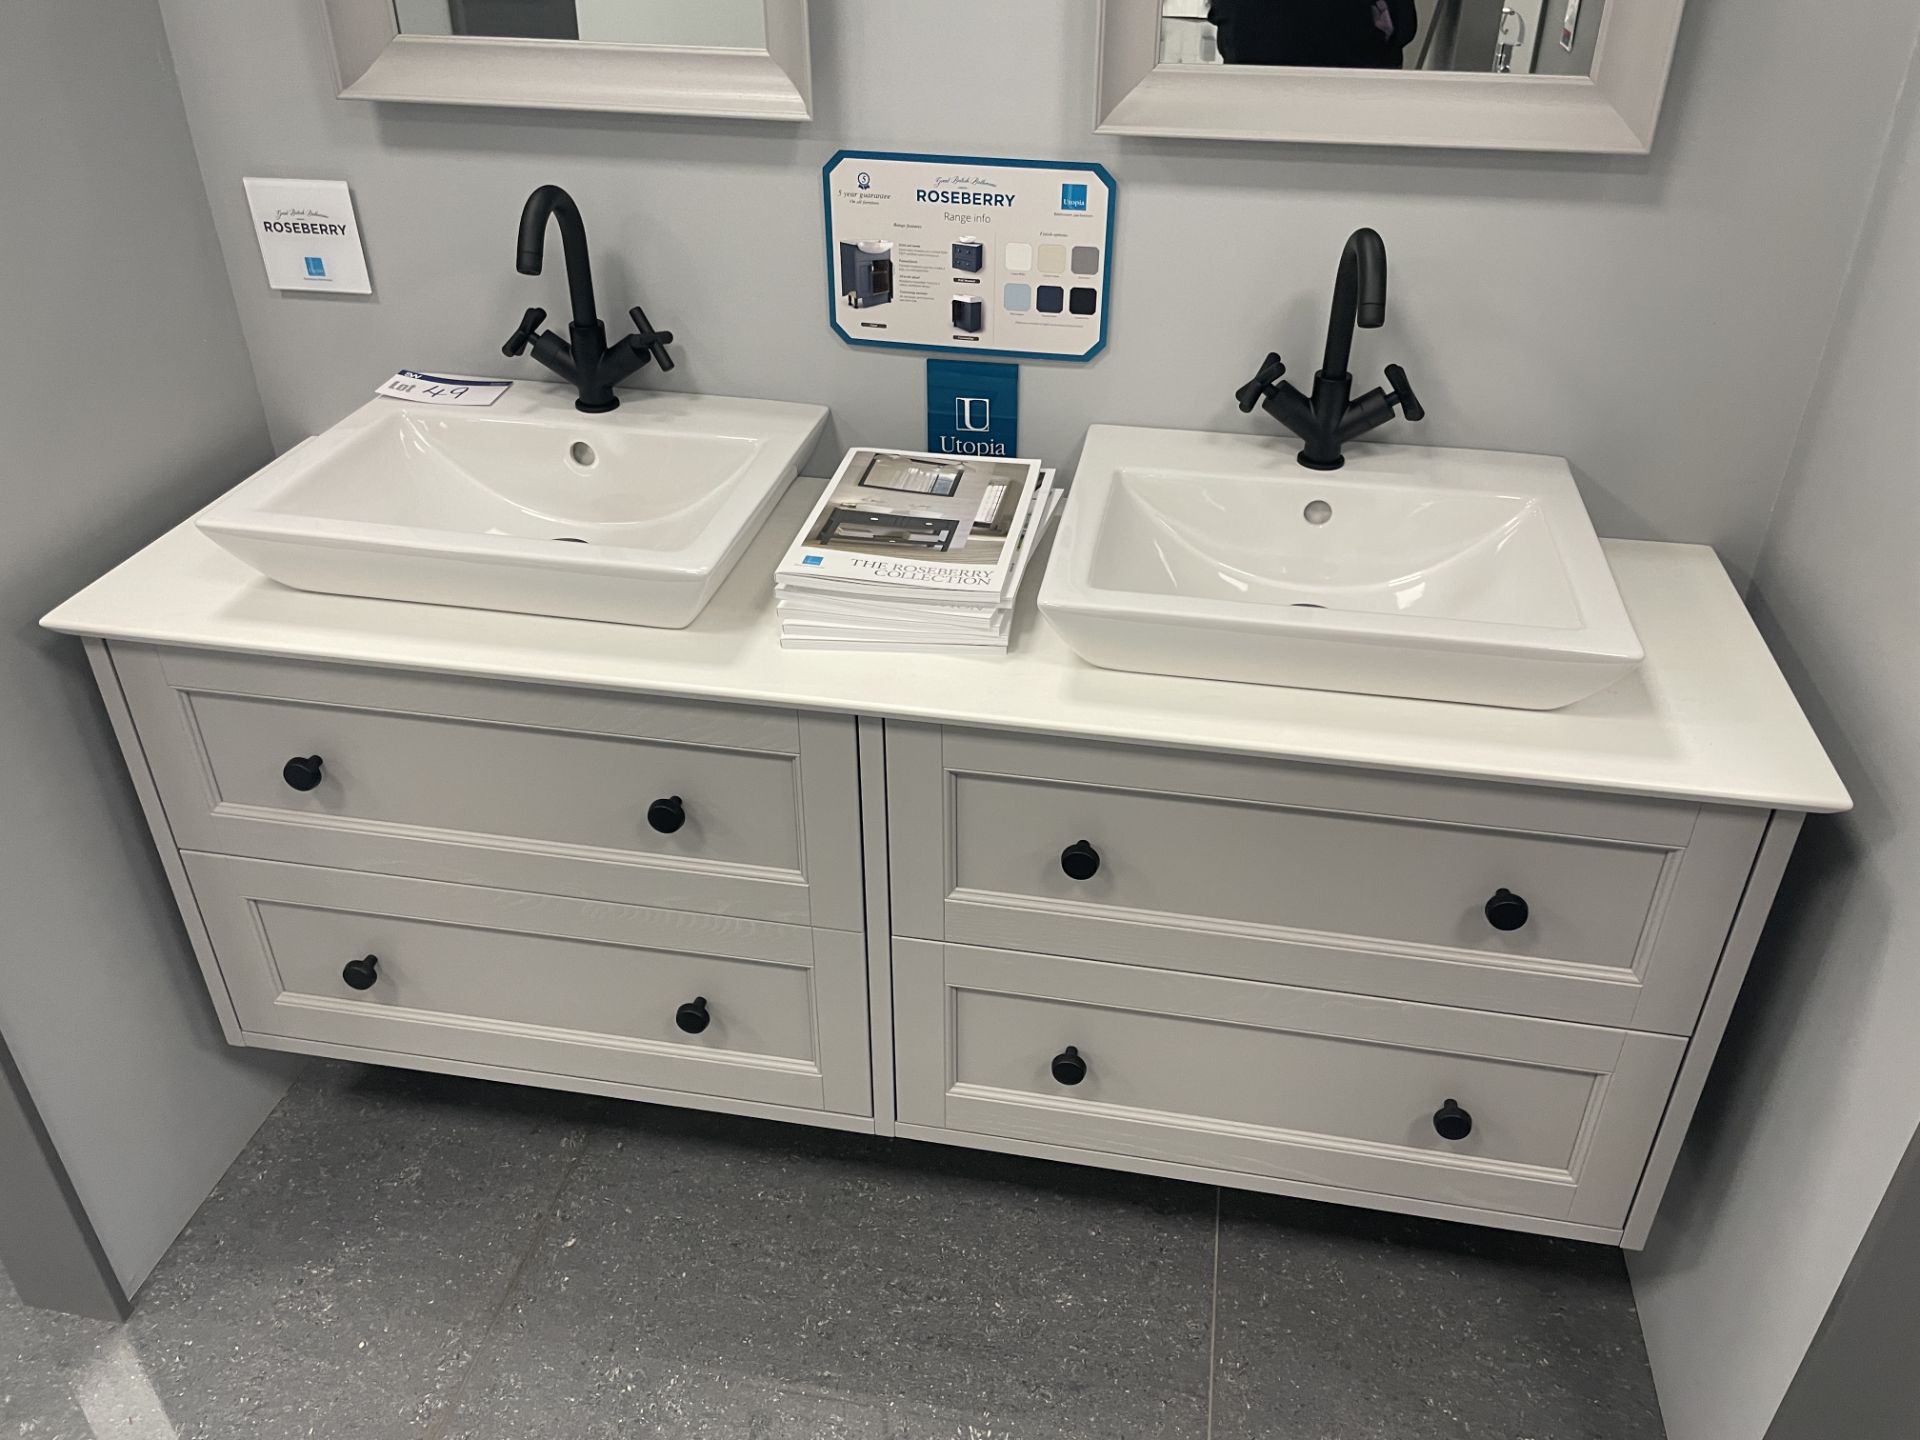 Utopia Roseberry TWIN BASIN RANGE, with taps, approx. 1.6m x 470mm Please read the following